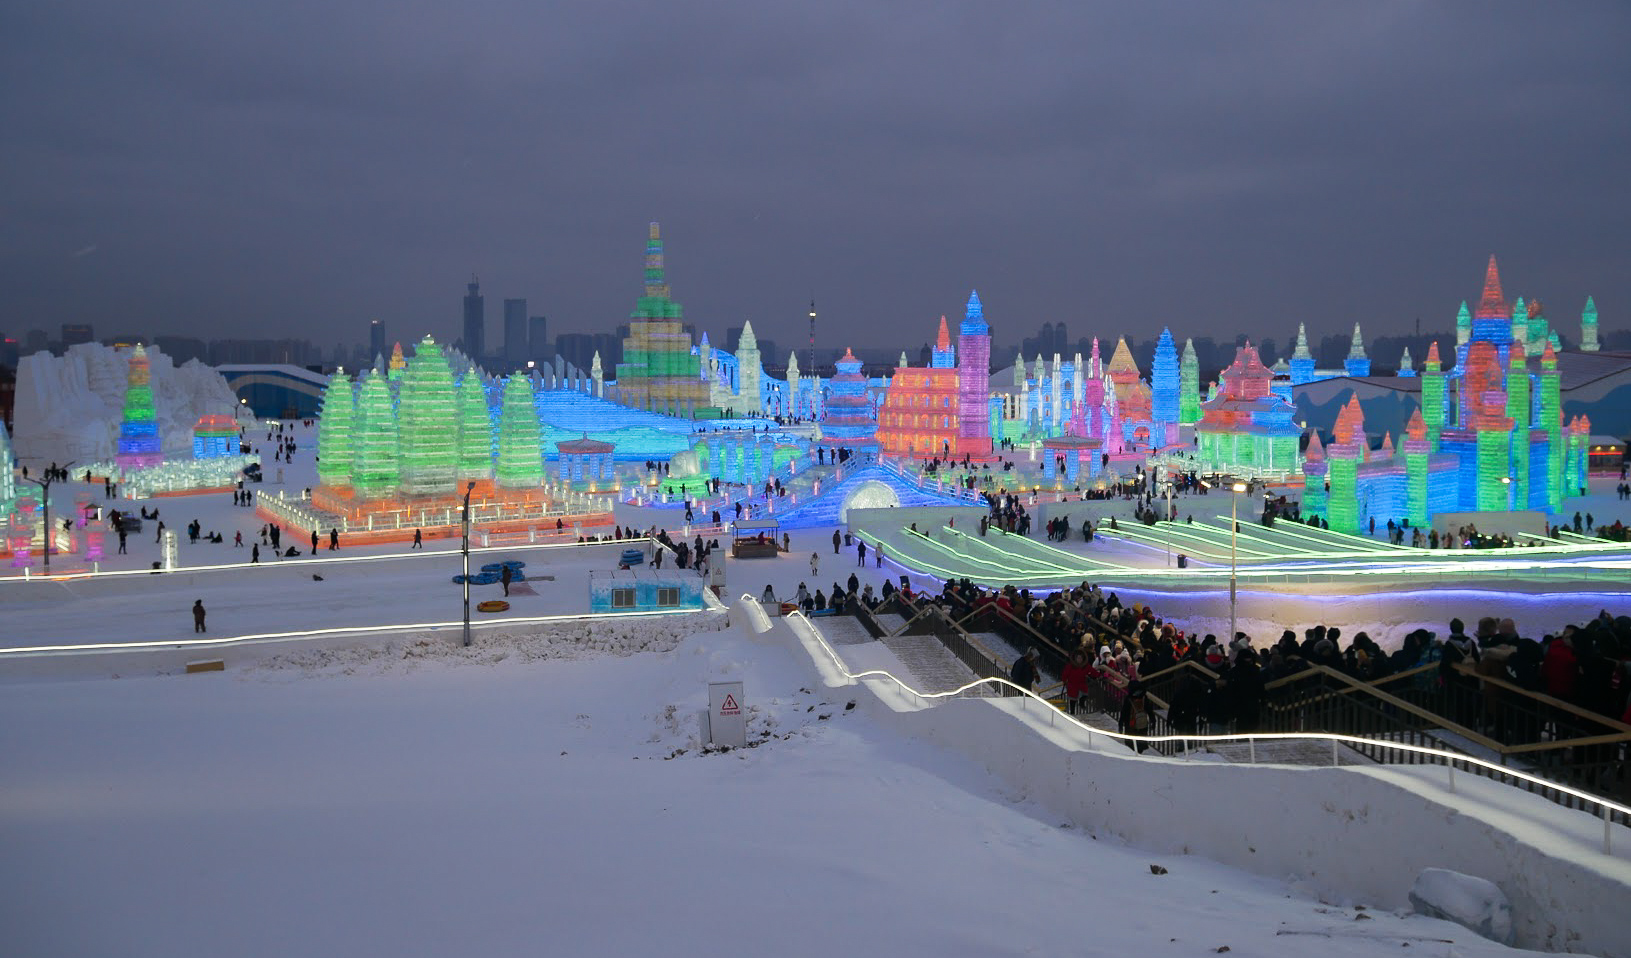 Harbin Ice & Snow Festival in the evening lit up by colourful lights, China